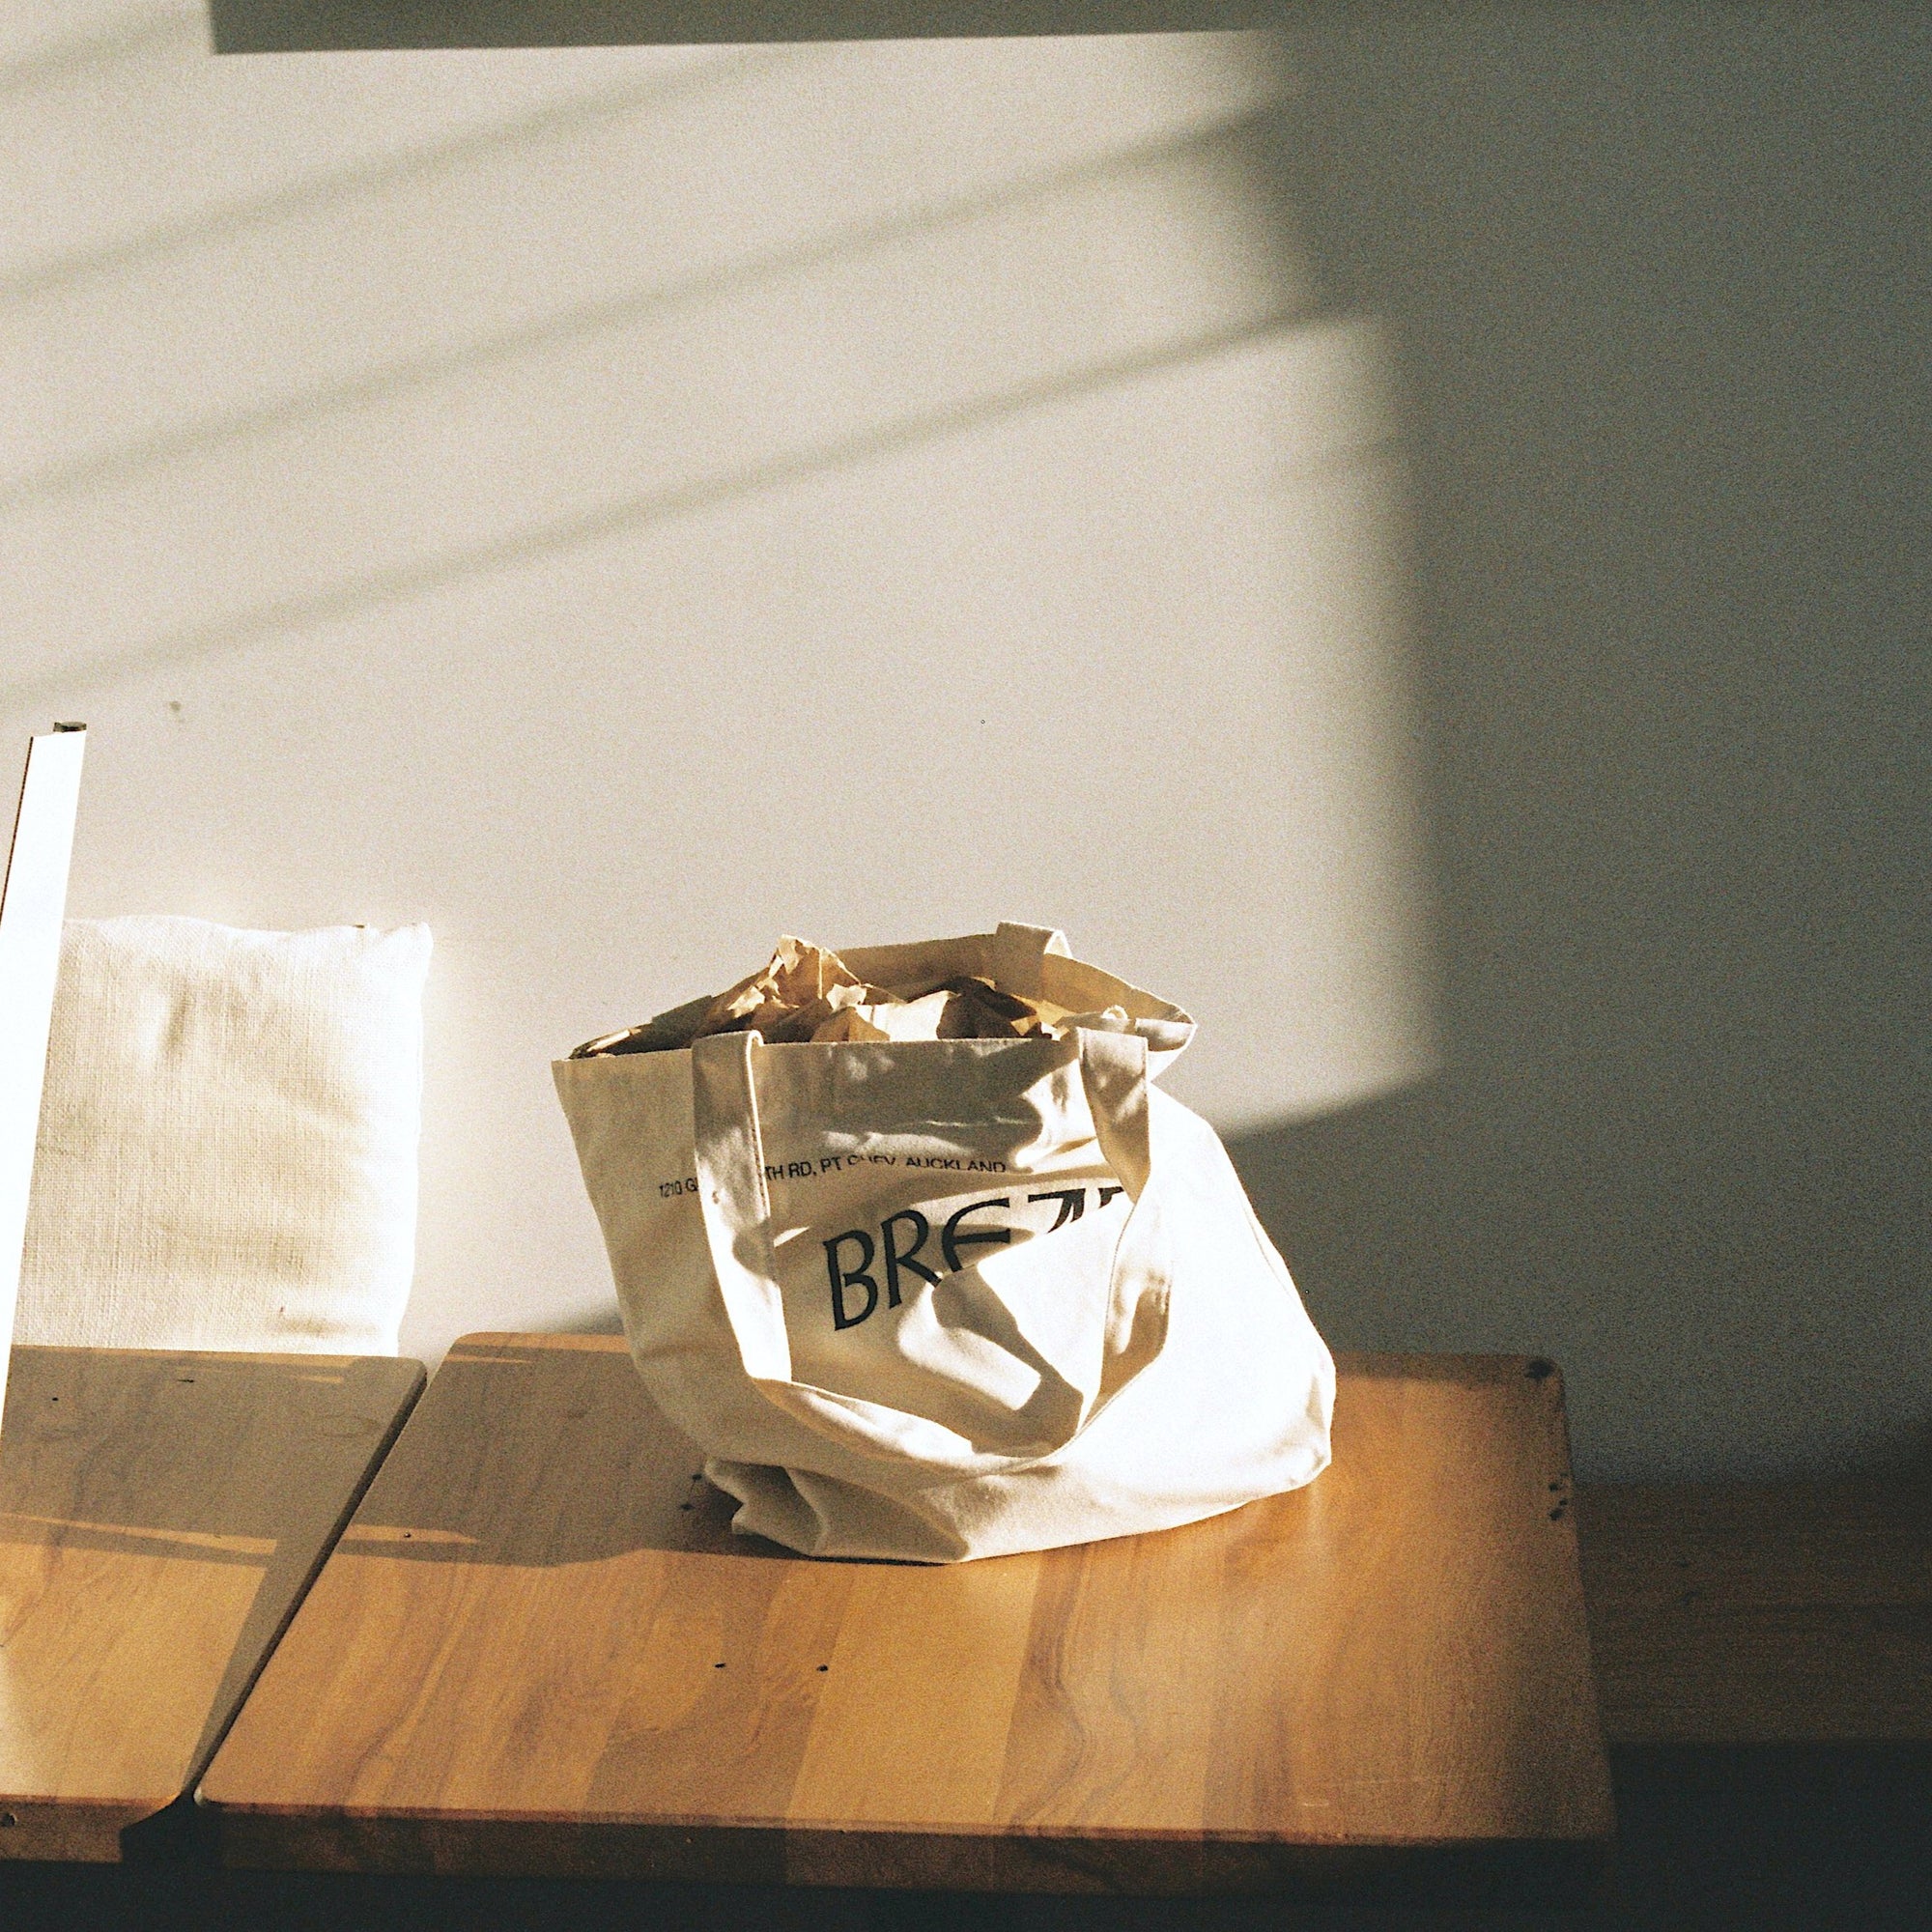 image of a daily bread branded tote bag on a wooden table in the sunlight